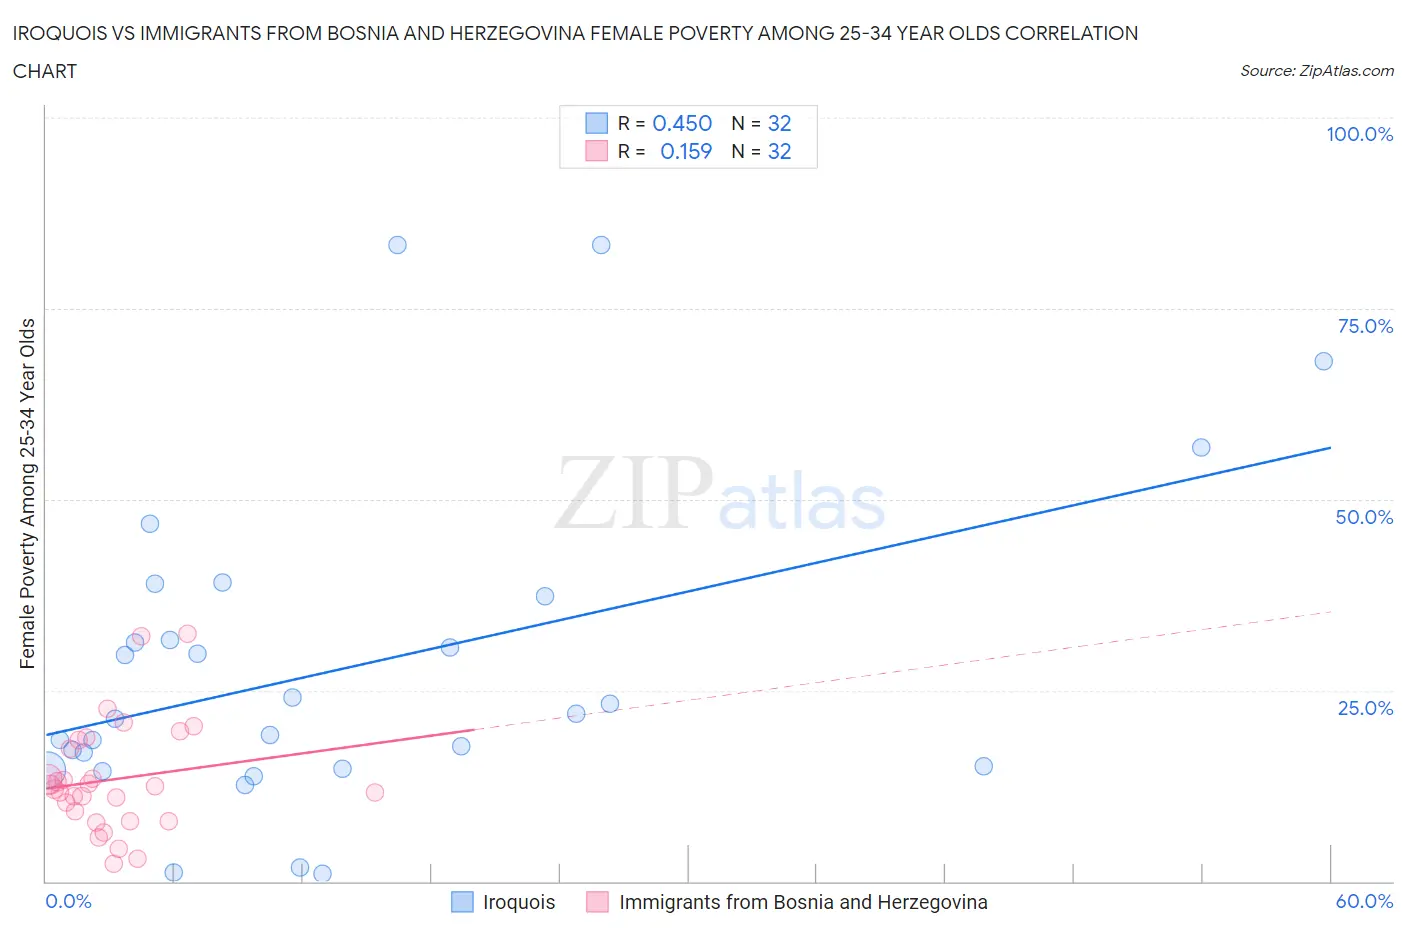 Iroquois vs Immigrants from Bosnia and Herzegovina Female Poverty Among 25-34 Year Olds